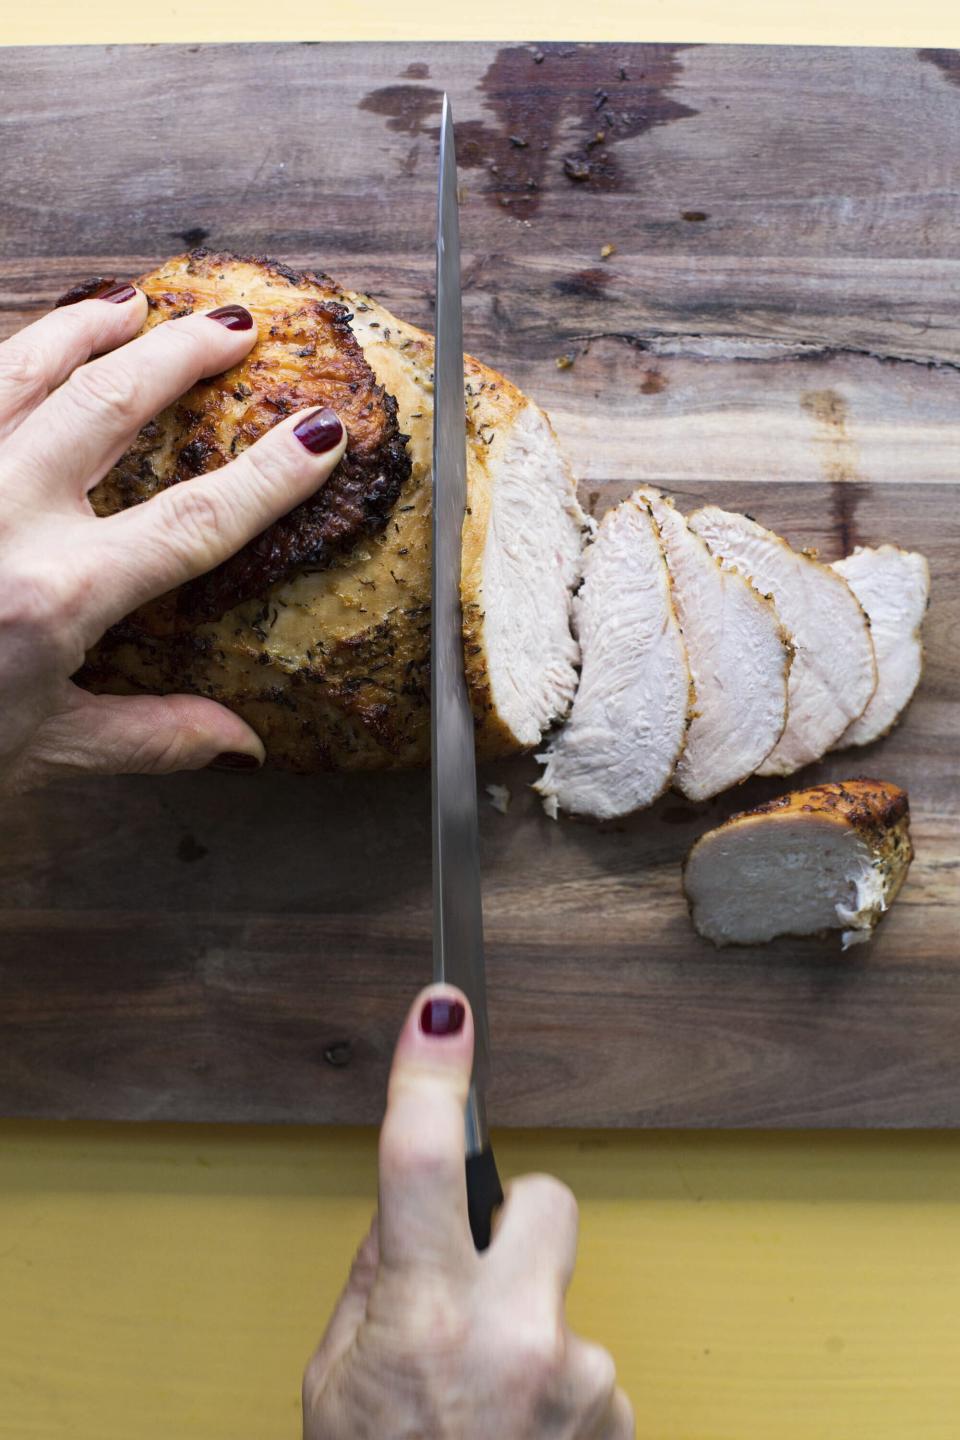 Roasted turkey breast is perfect for serving a smaller group on Thanksgiving. When buying a turkey, aim for 1 pound per person.